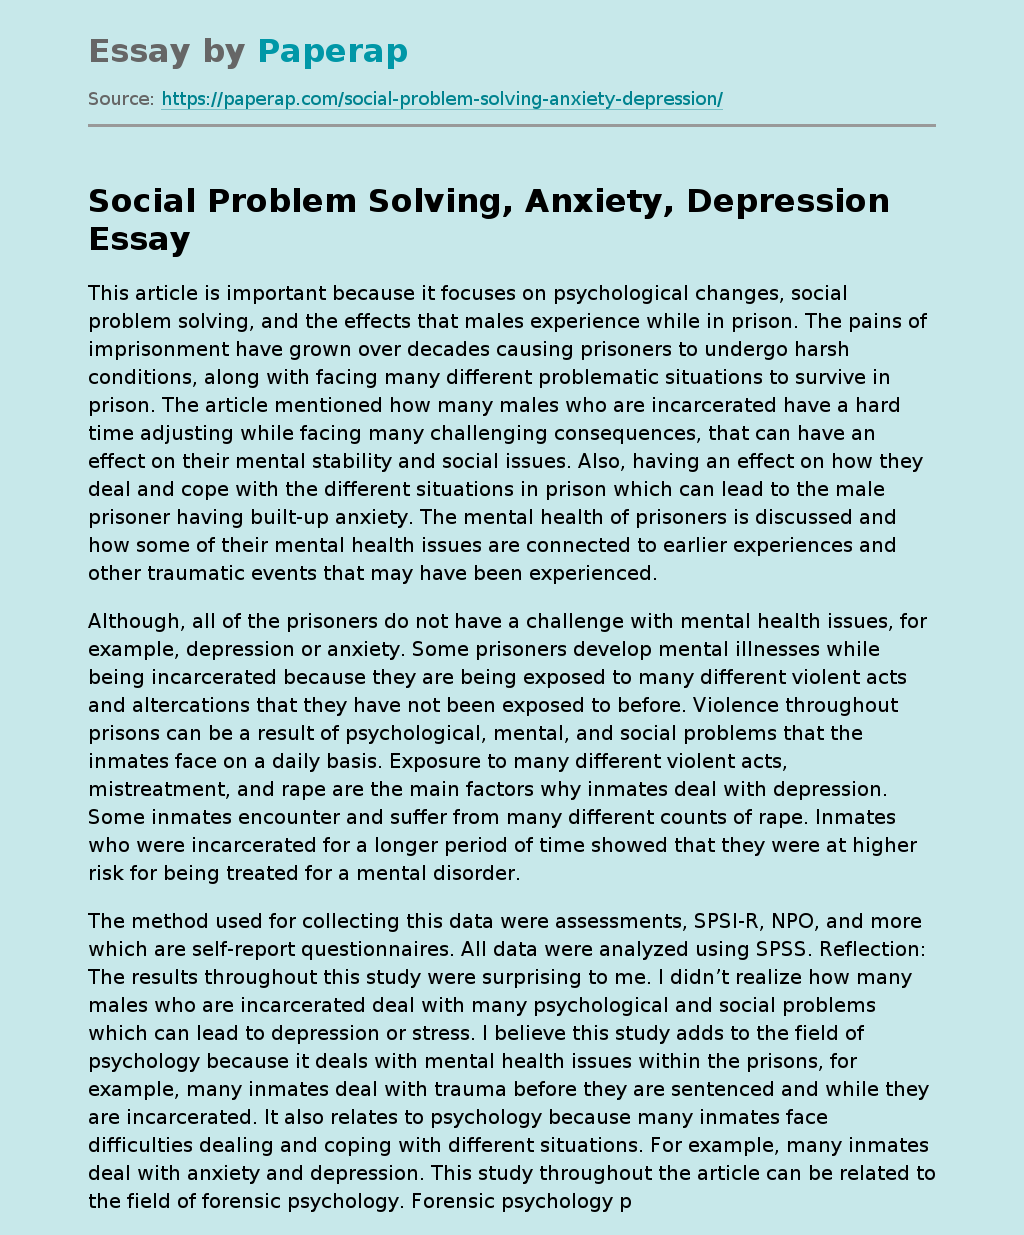 Social Problem Solving, Anxiety, Depression